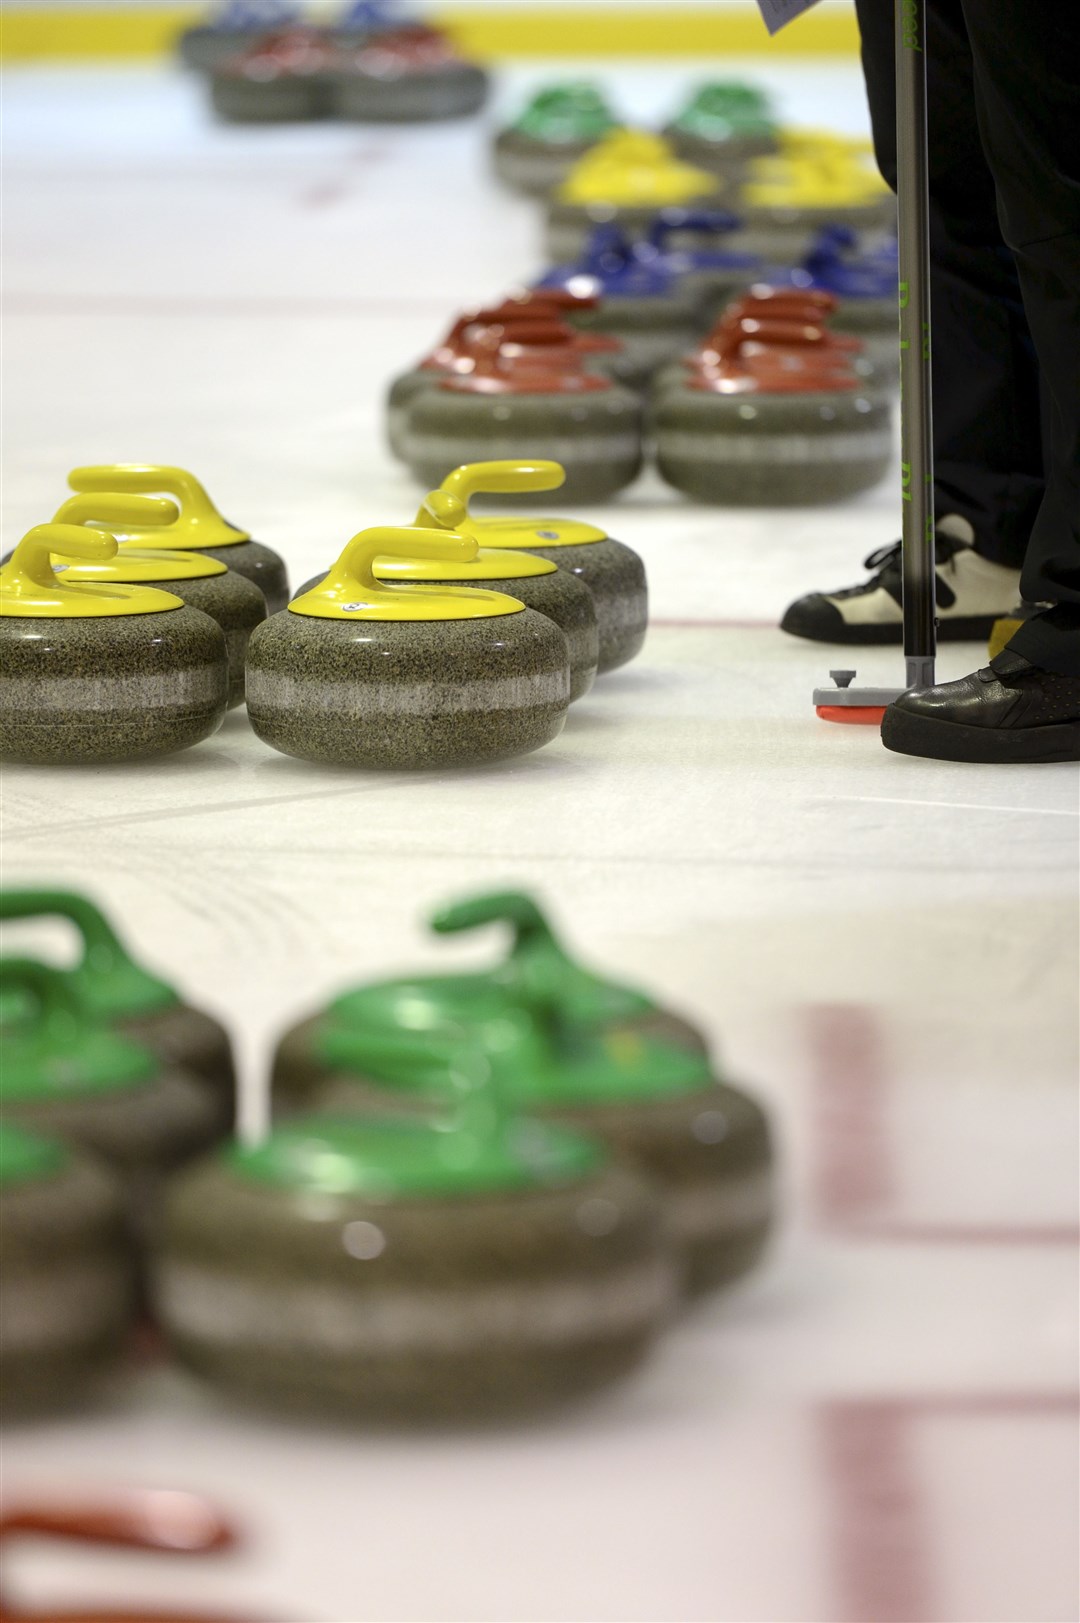 Moray curling action.